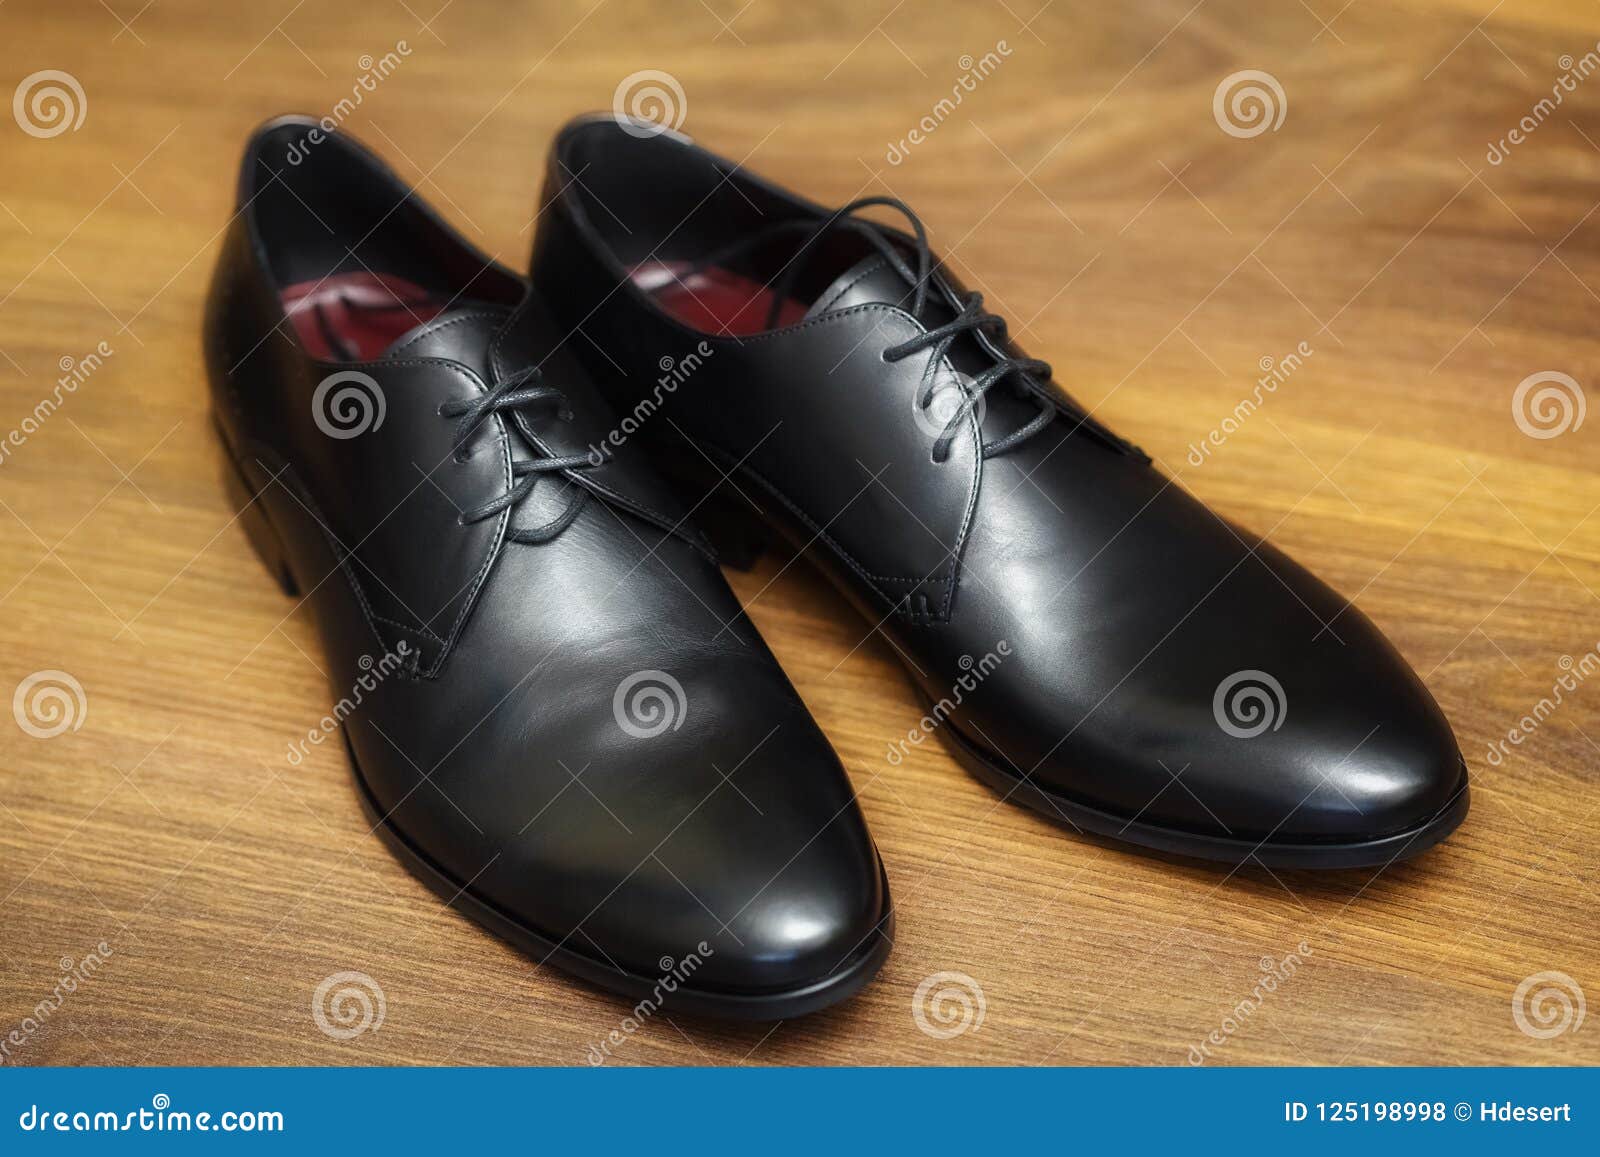 Black Leather Male Shoes on Wooden Background Stock Photo - Image of ...